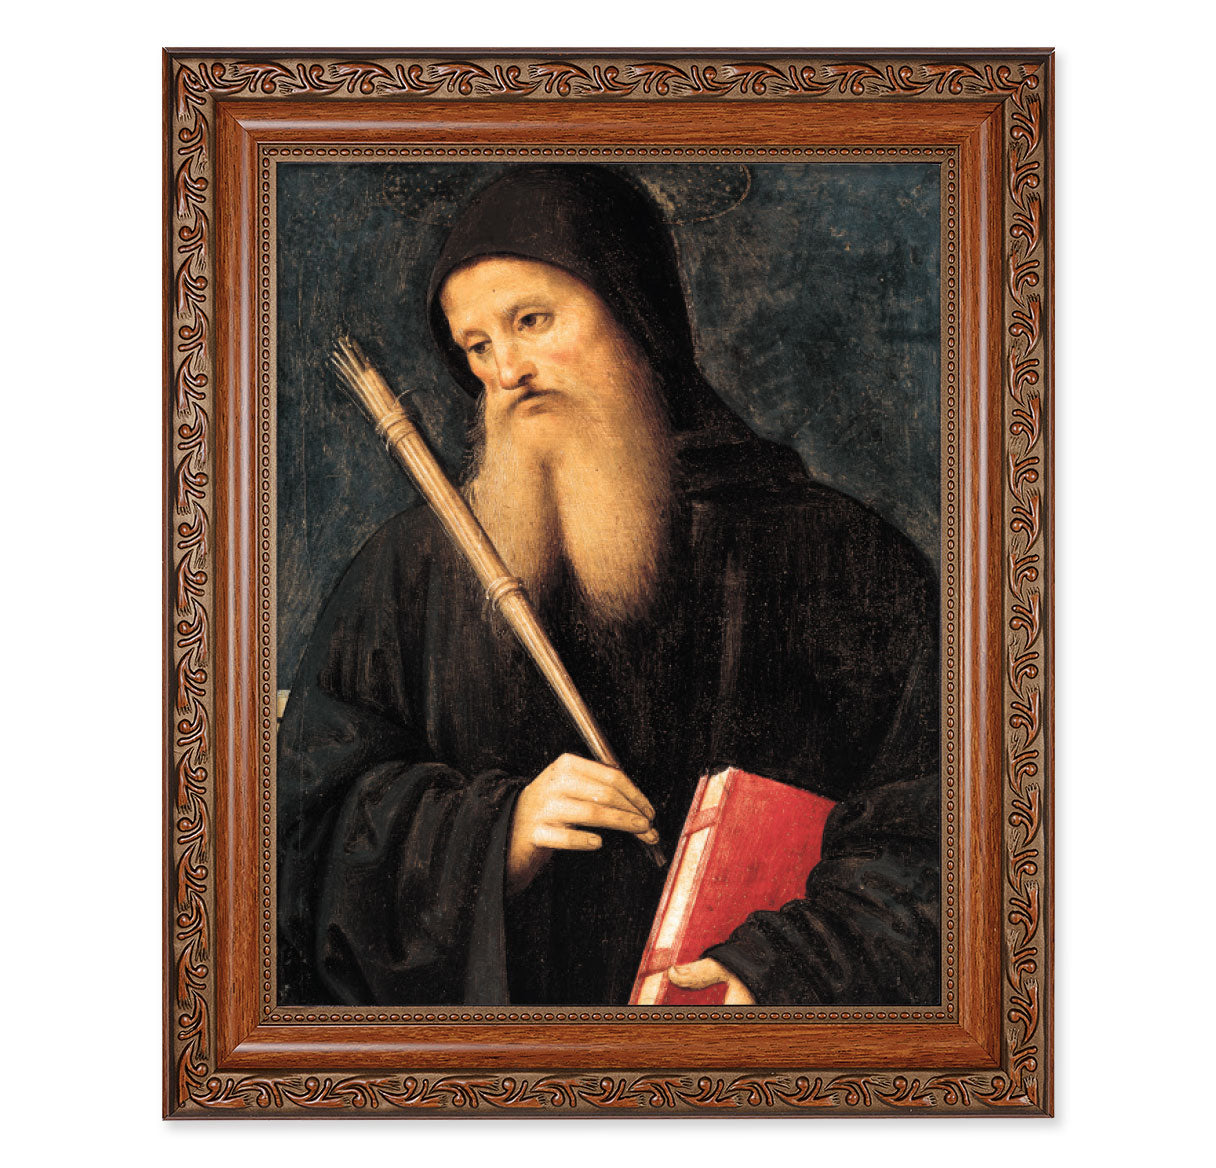 St. Benedict Picture Framed Wall Art Decor Large, Antiqued Dark Mahogany Finish Frame with Acanthus-Leaf Detailing